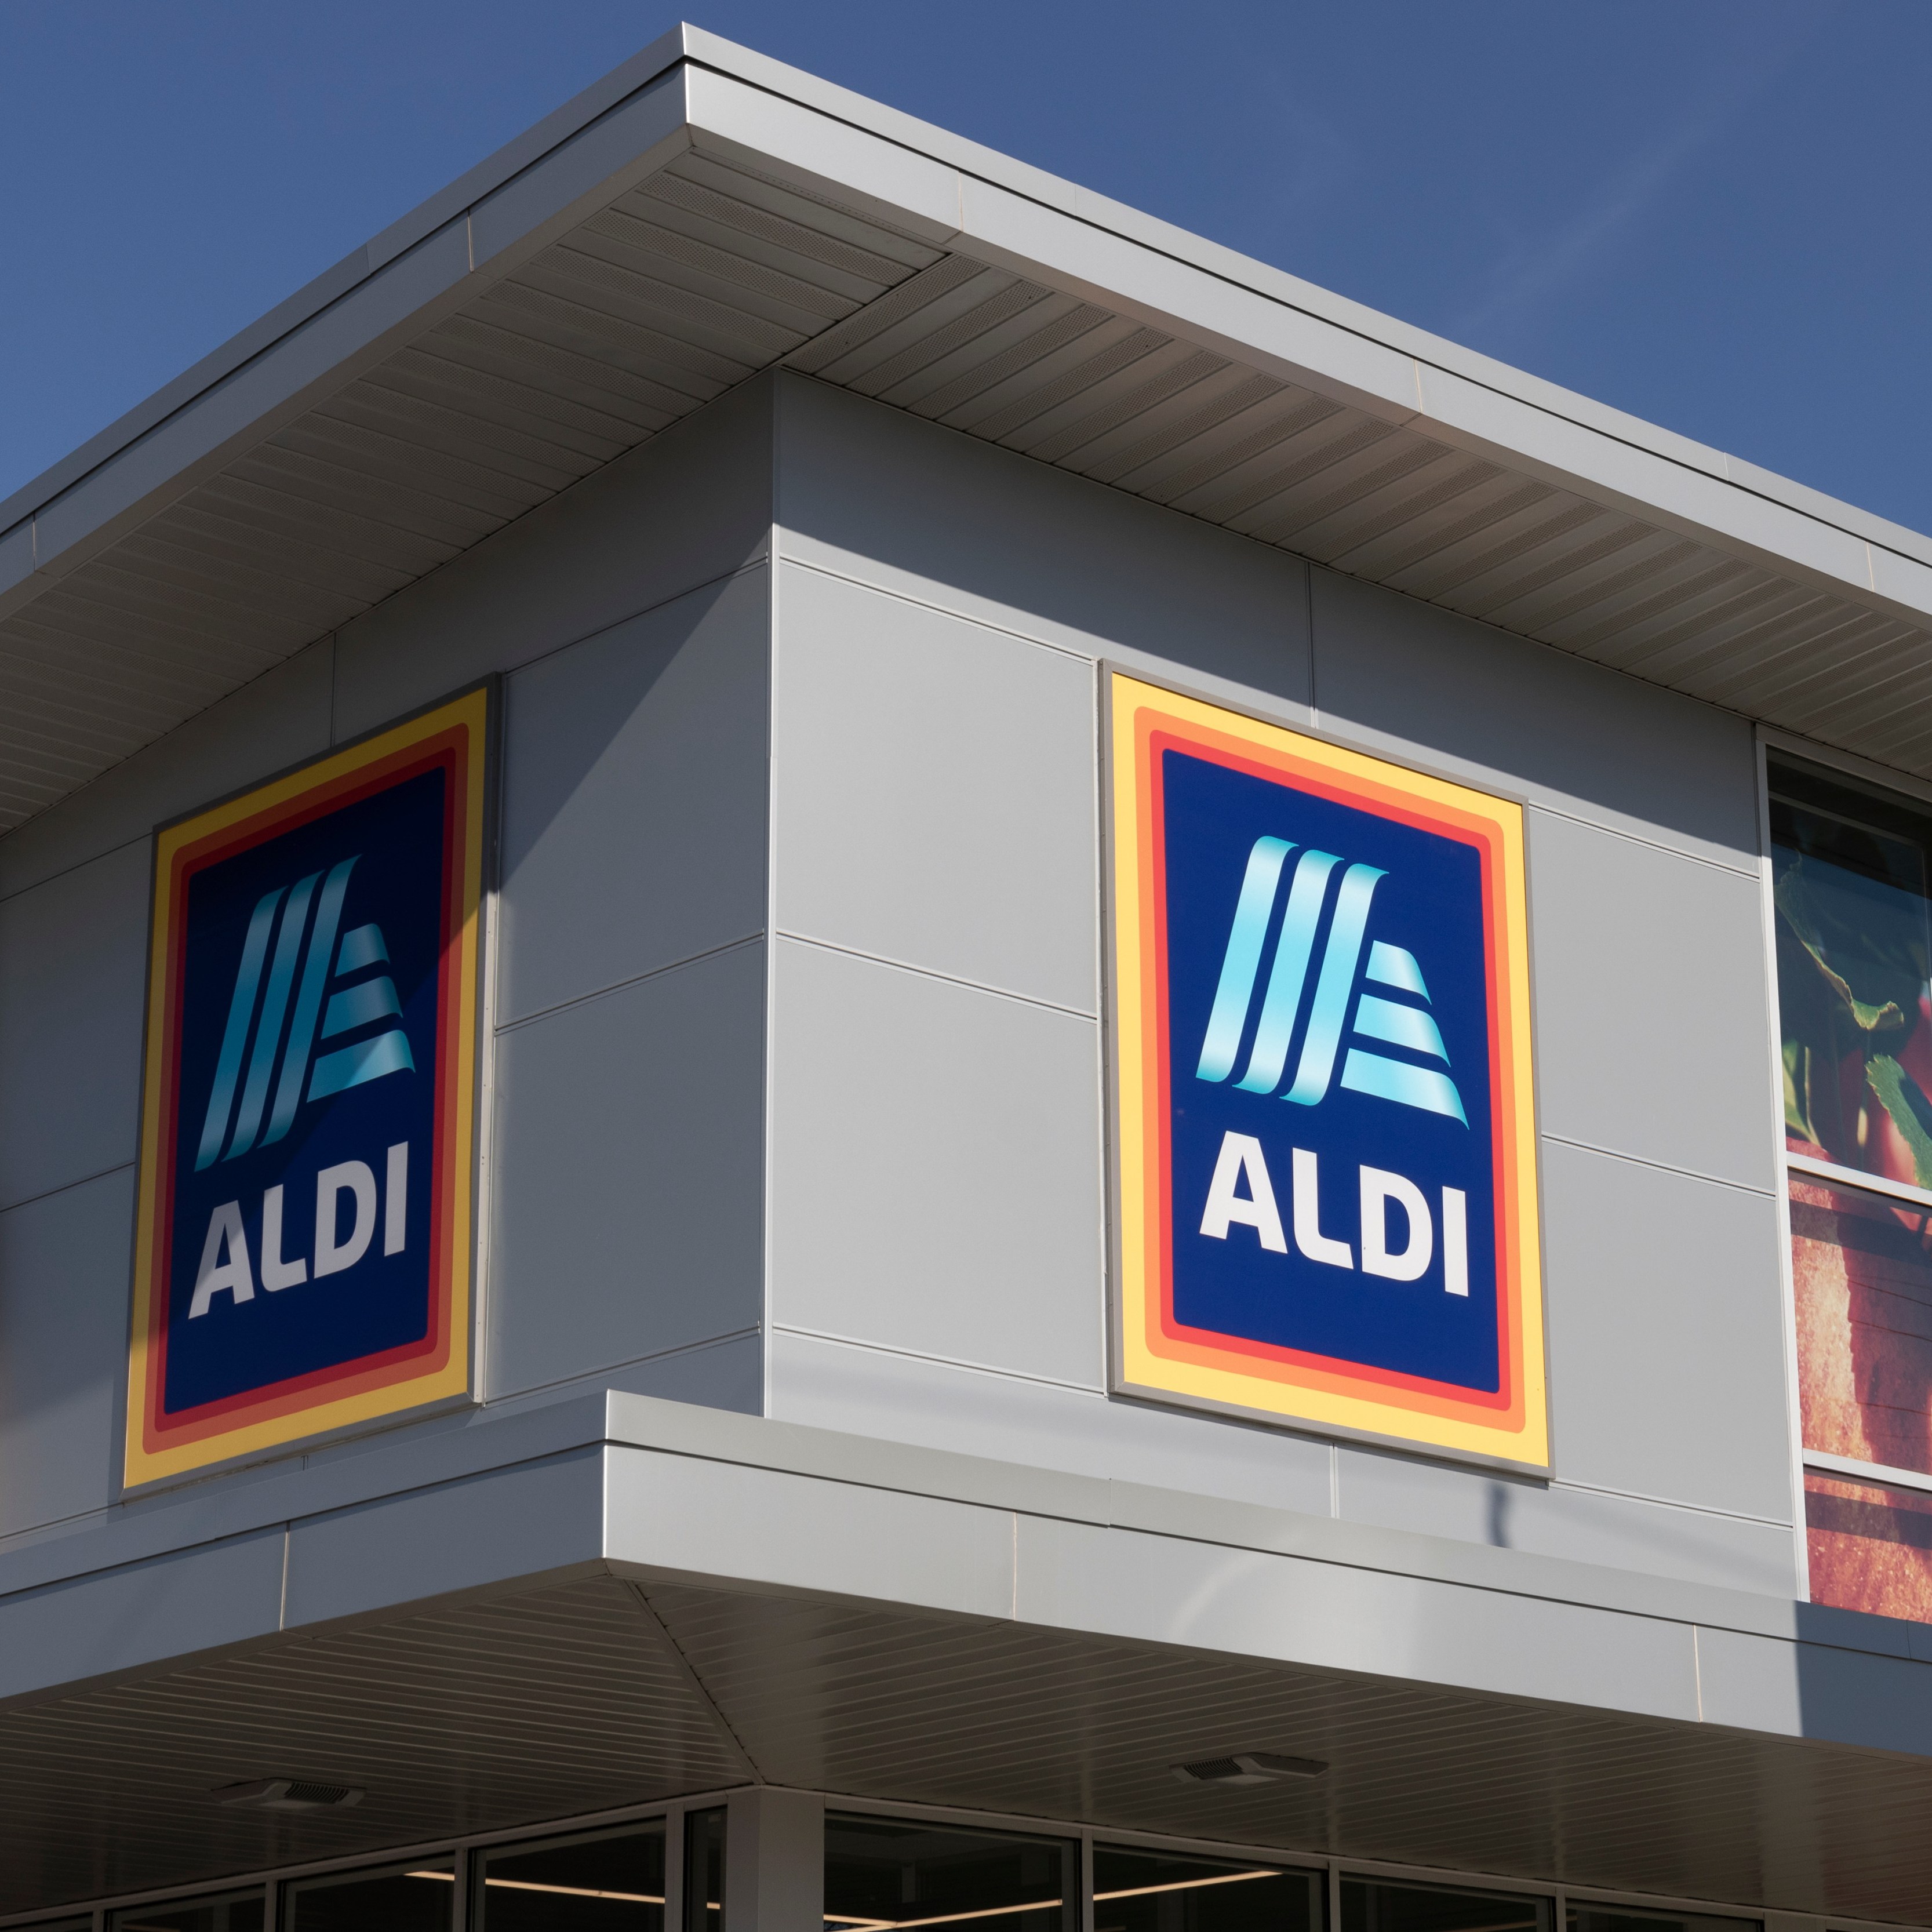 Perth and Kinross council had given Aldi the green light to build a supermarket at Pitheavlis